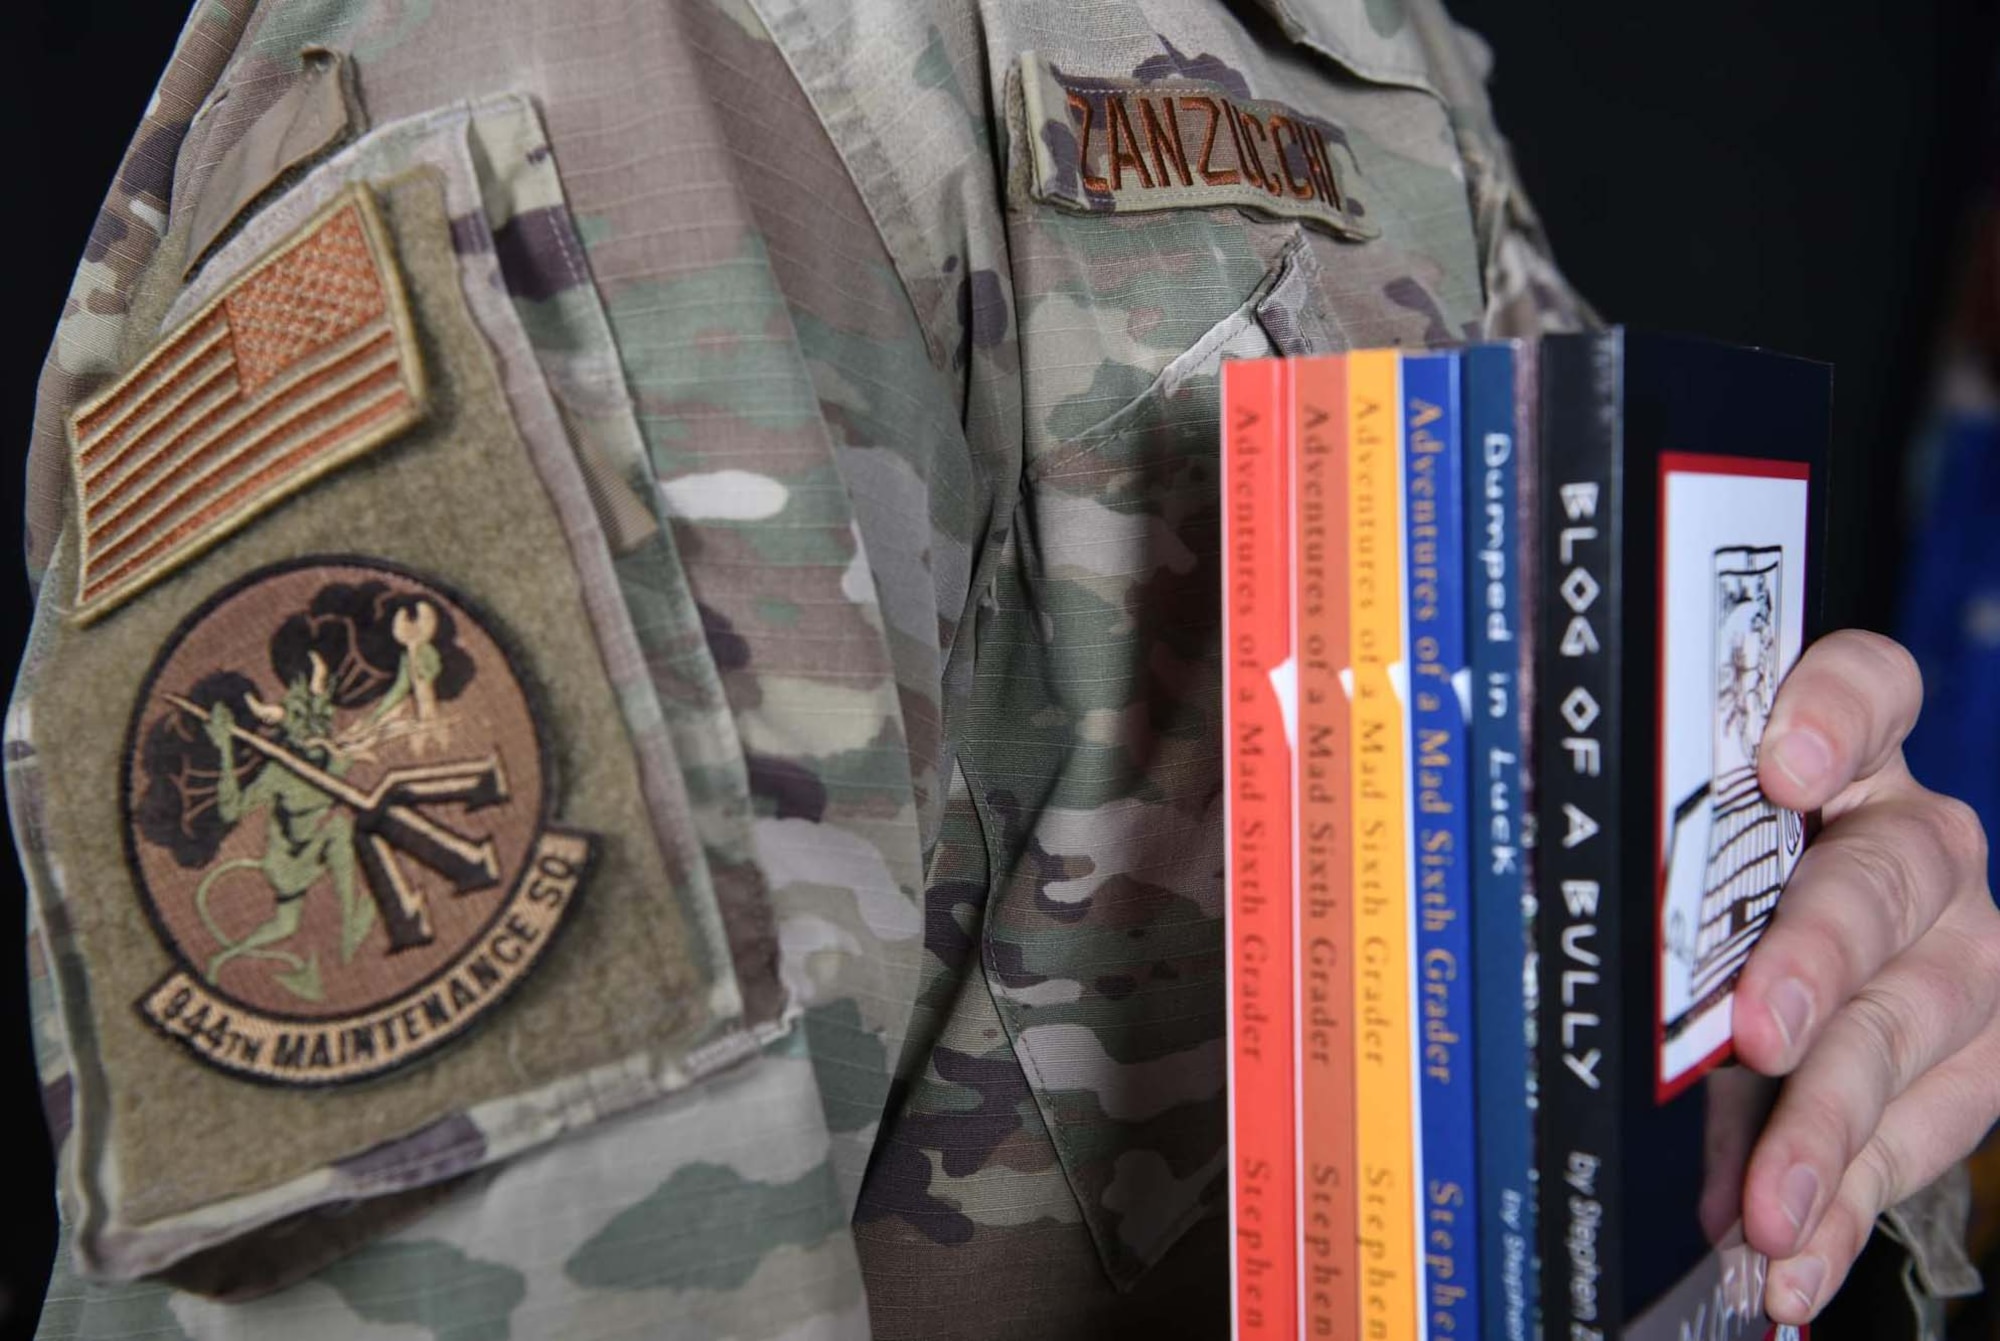 The US Army Patch Book